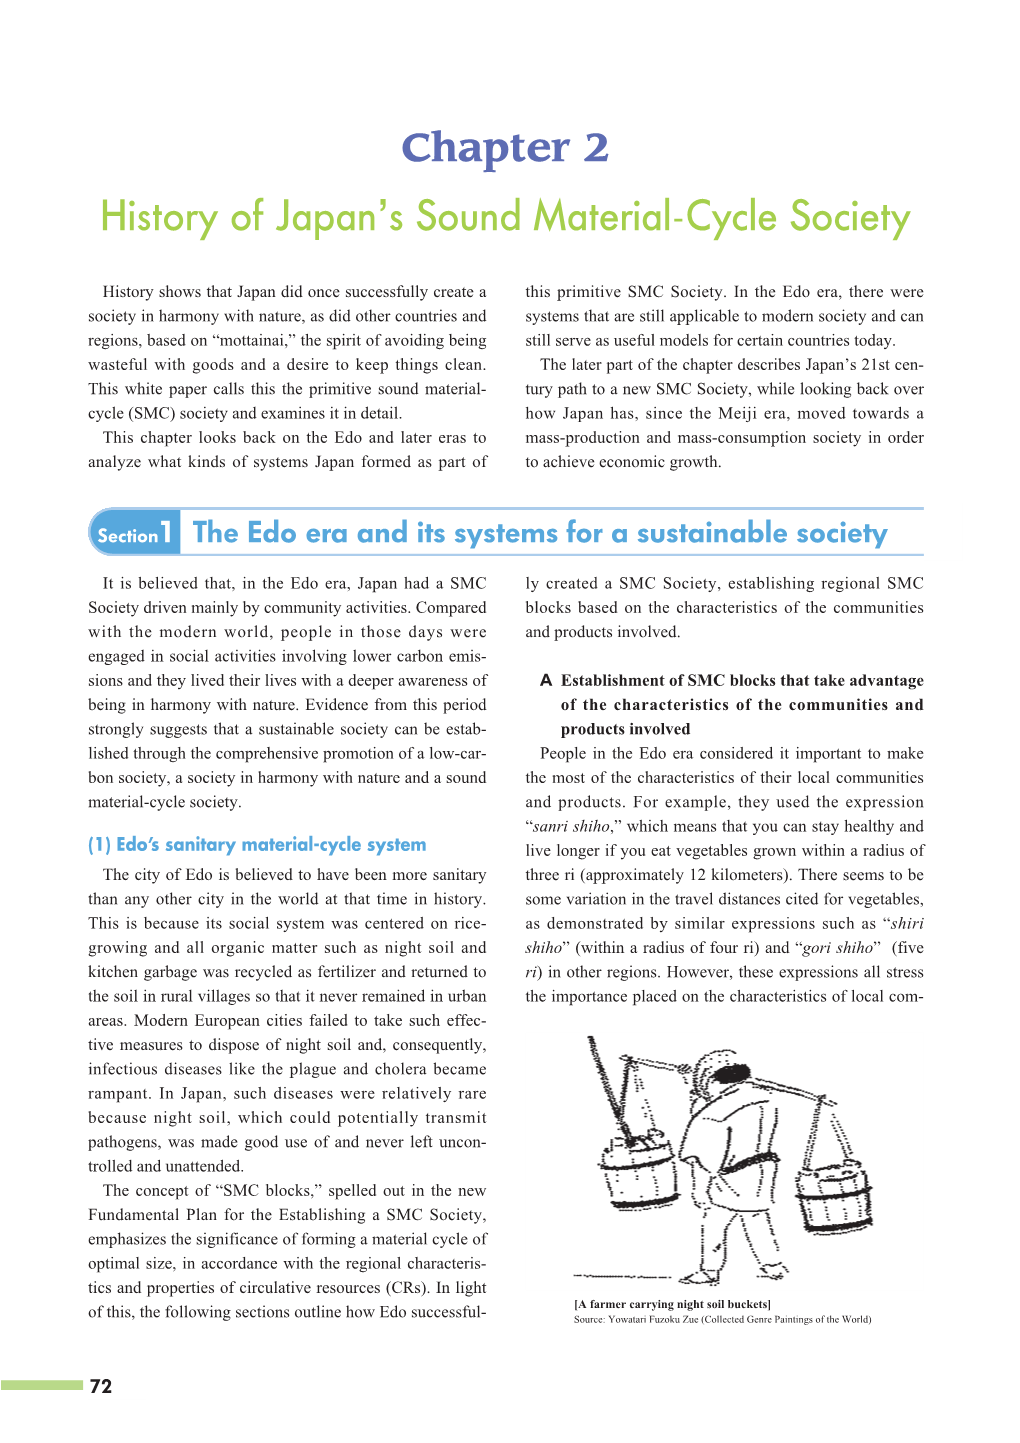 Chapter 2 History of Japan's Sound Material-Cycle Society [PDF 421KB]